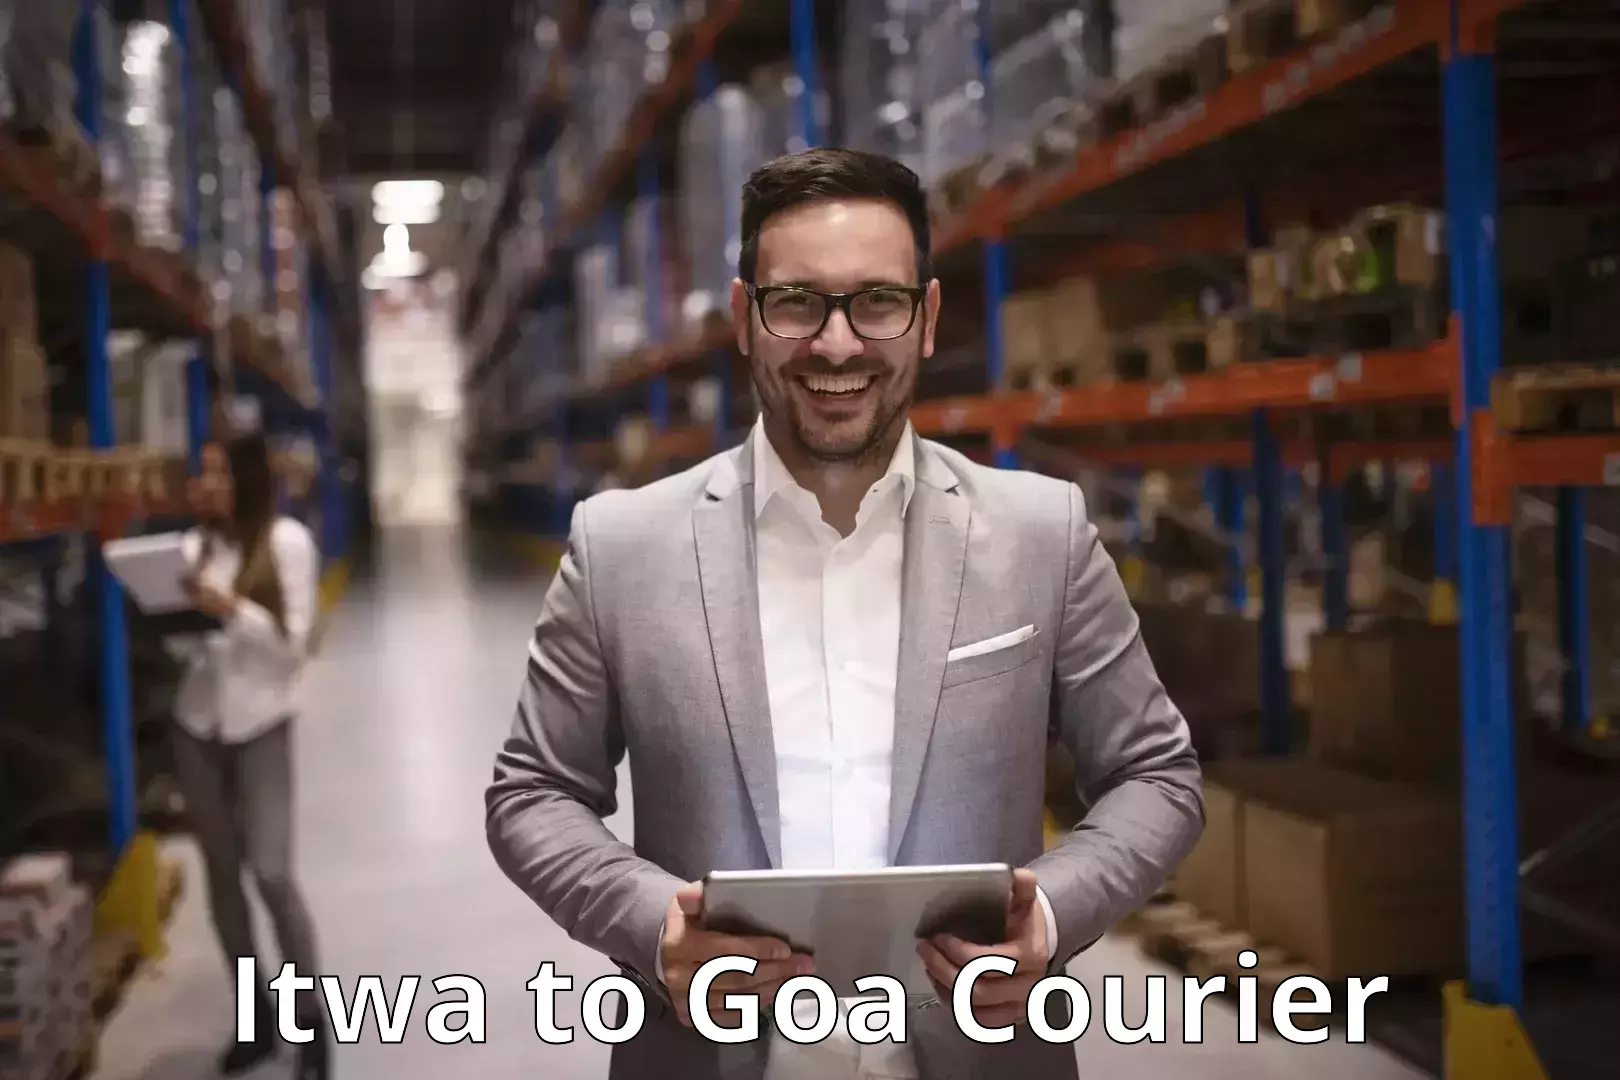 Courier service innovation Itwa to Goa